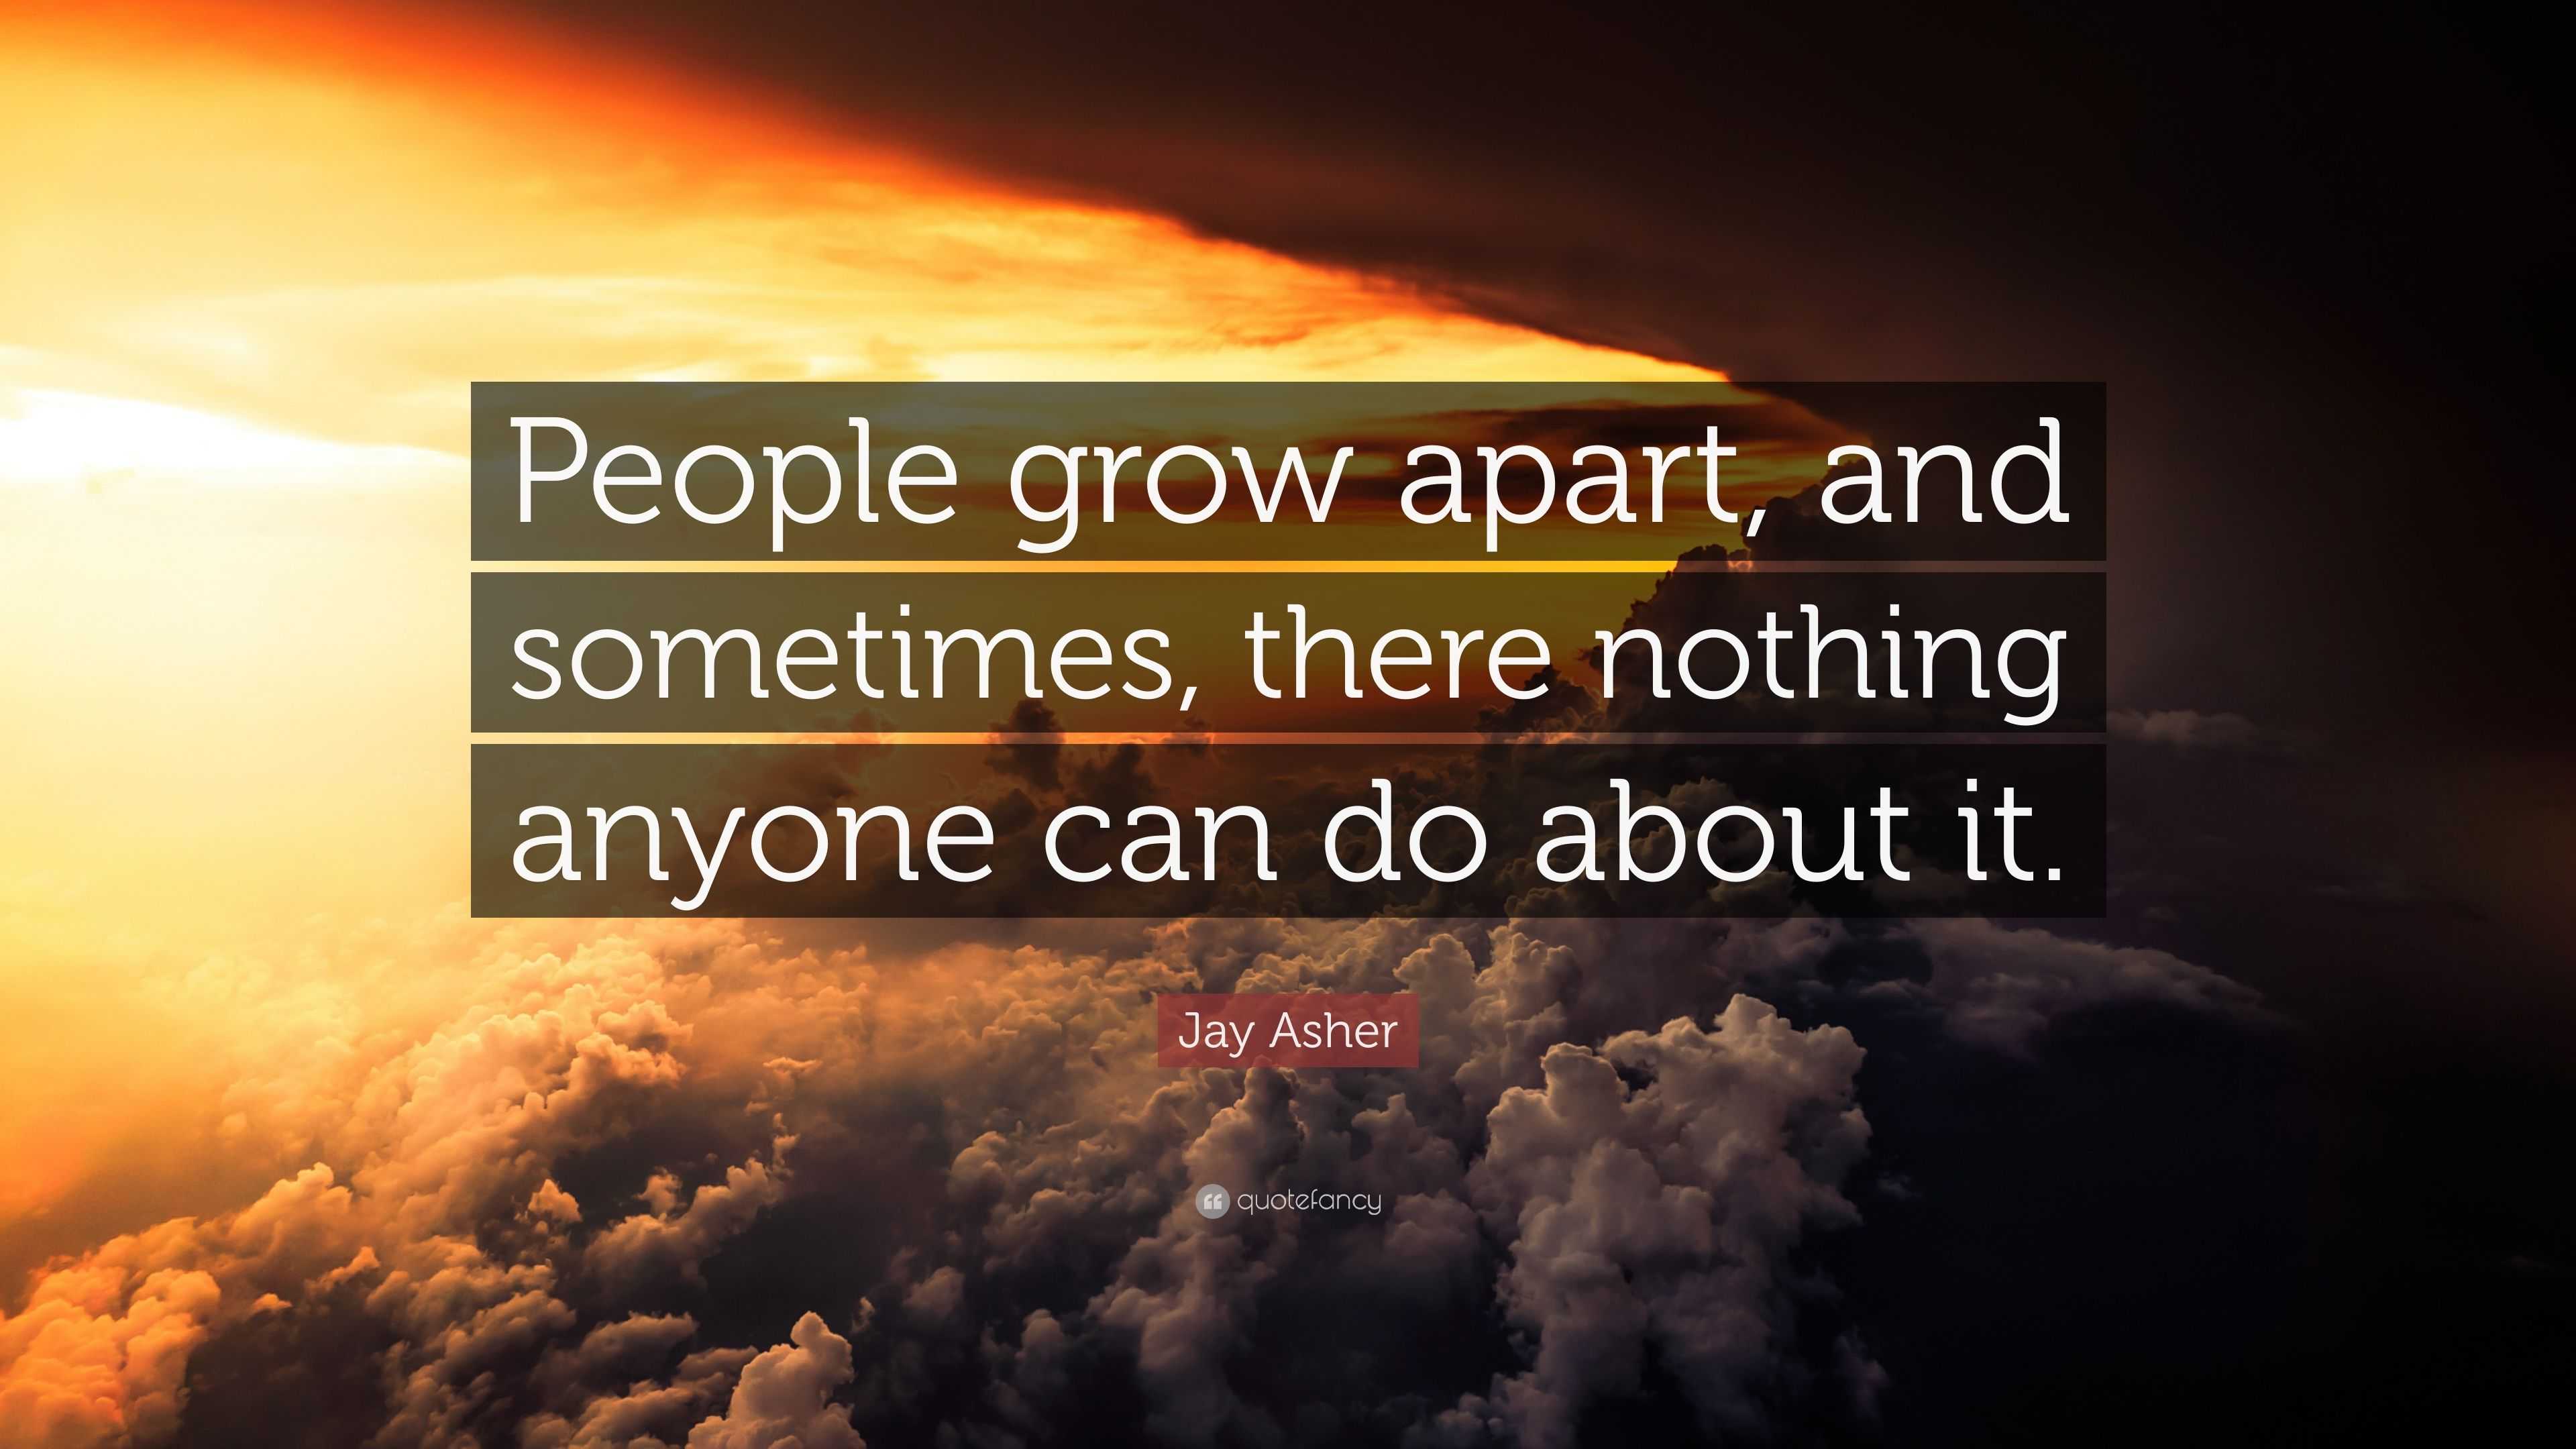 Jay Asher Quote “people Grow Apart And Sometimes There Nothing Anyone Can Do About It ”